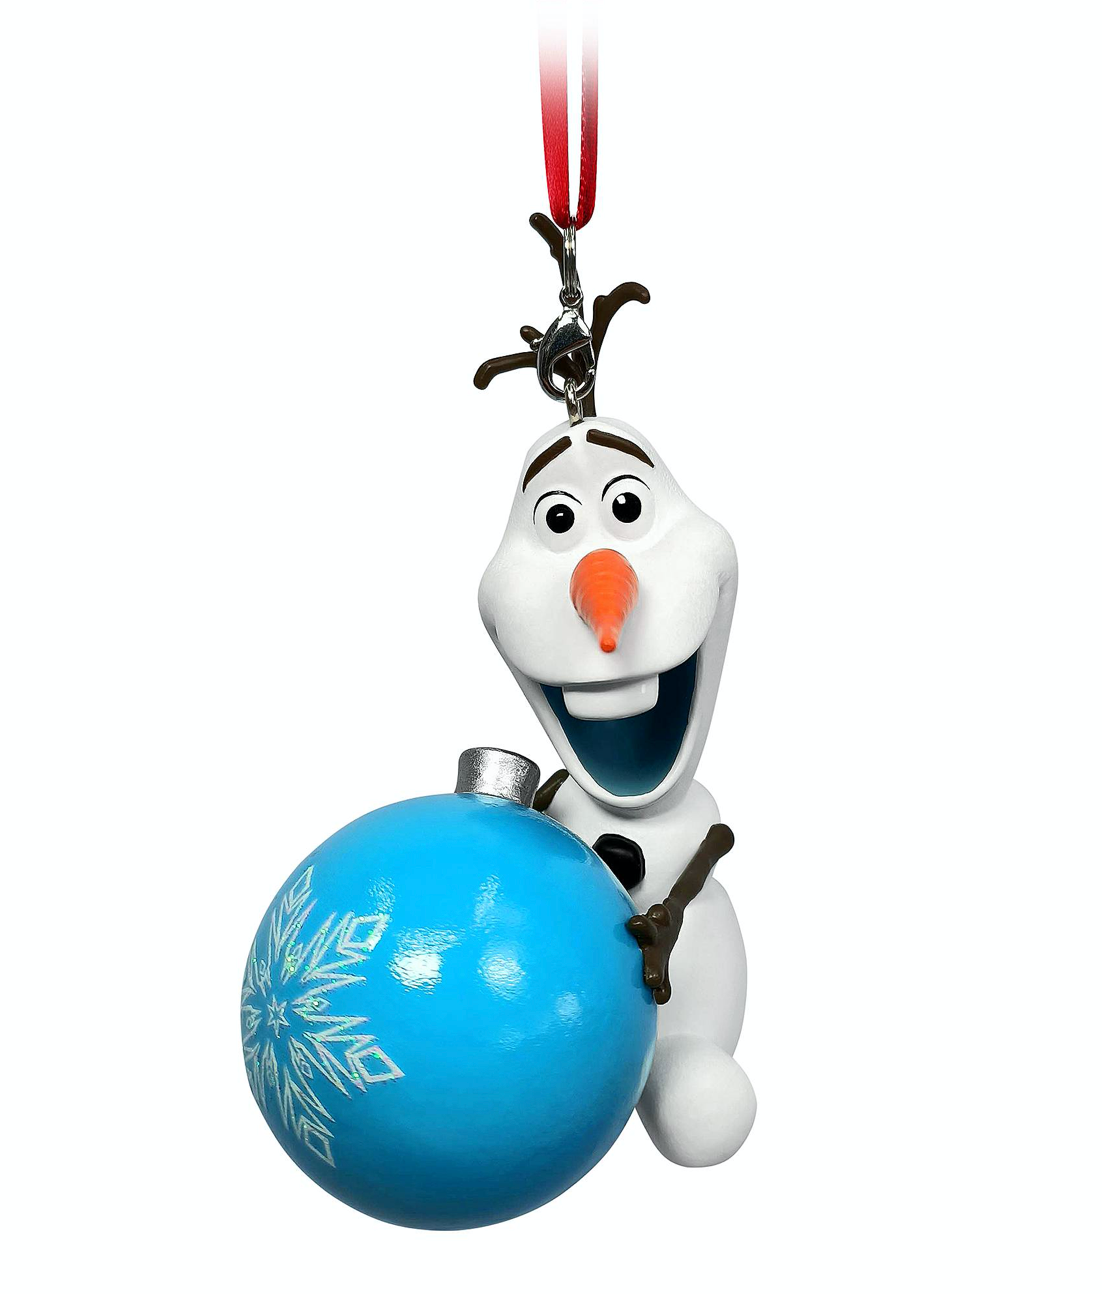 Disney Parks Frozen Olaf with Ball Ornament Christmas Ornament New with Tag